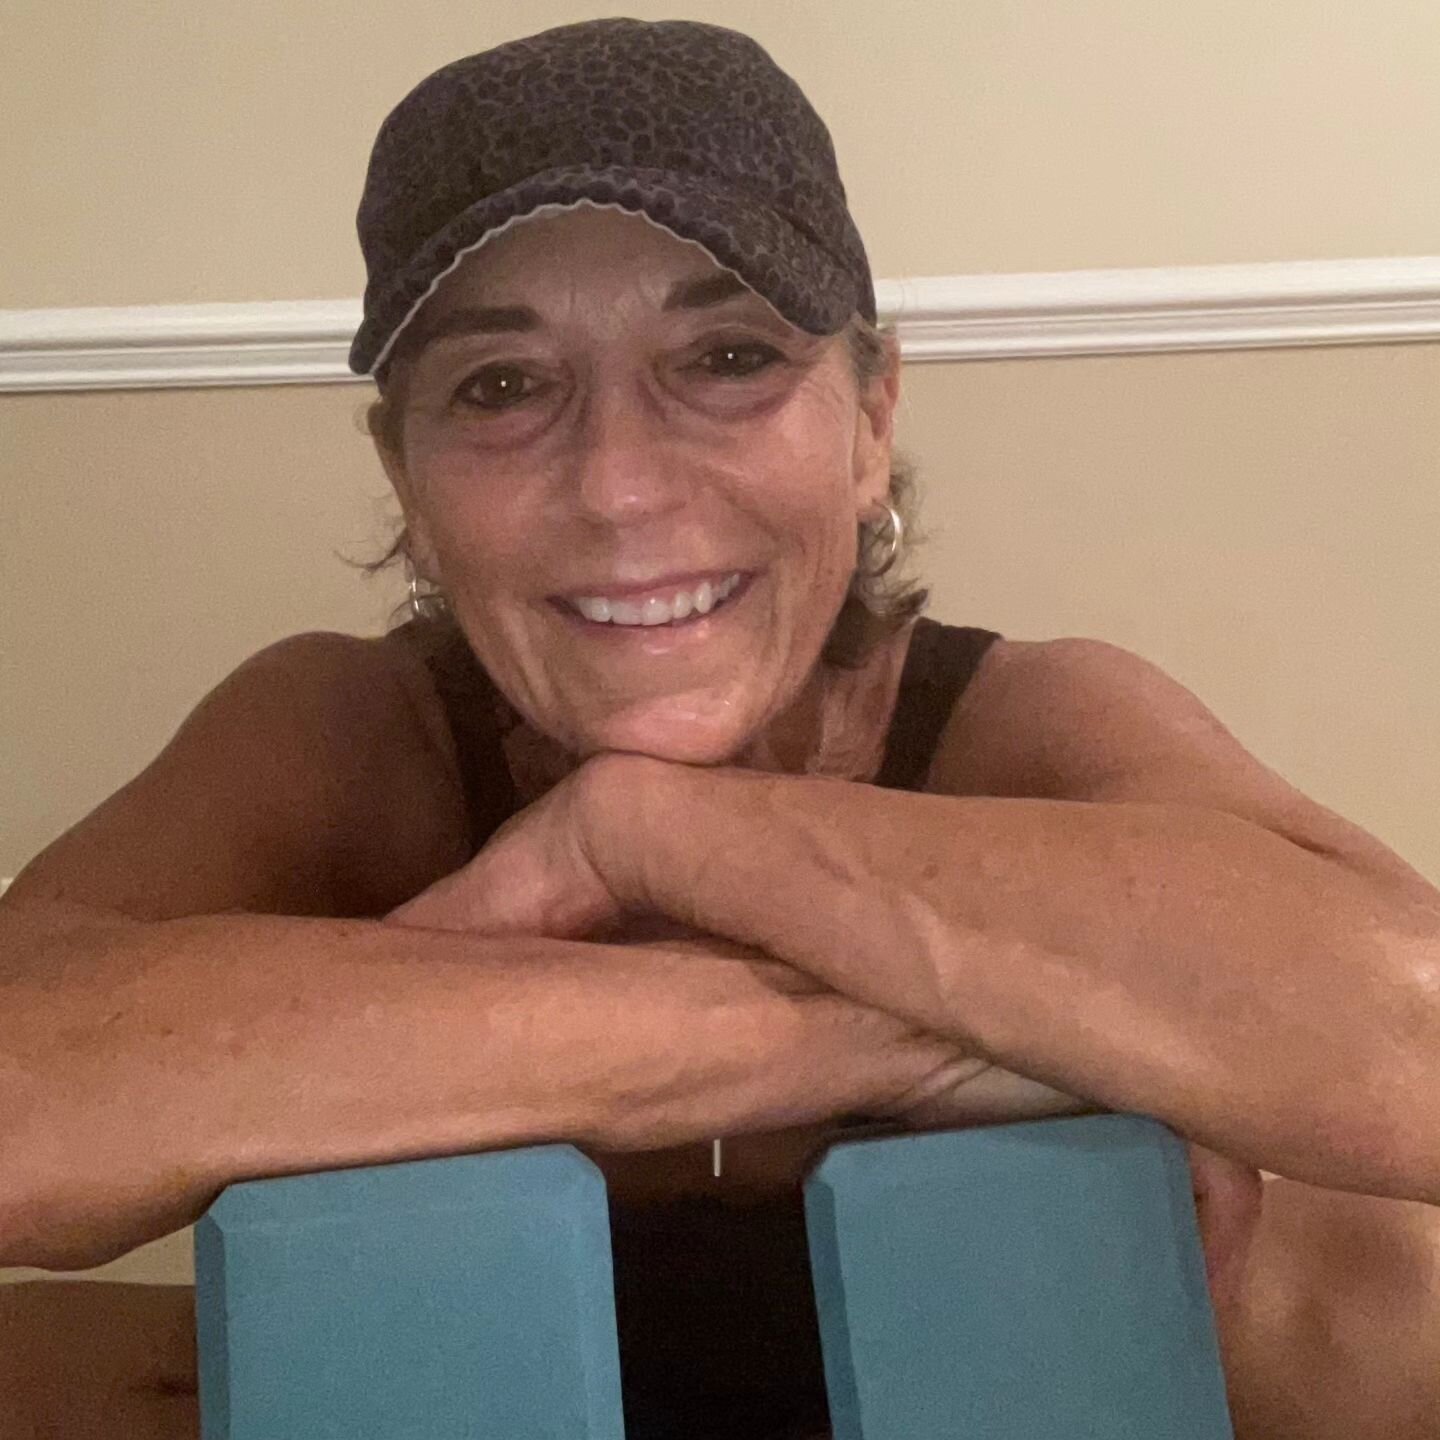 DO Pilates. 
FEEL amazing.
The end :heart:

What are you waiting for? 
A year from now, you&rsquo;ll wish you had started  TODAY!

Join Renee for Hot Pilates, Wednesdays at 6 PM, Victory Power Yoga, Clayton to feel your best NOW!
#claytonyoga #jocoyo